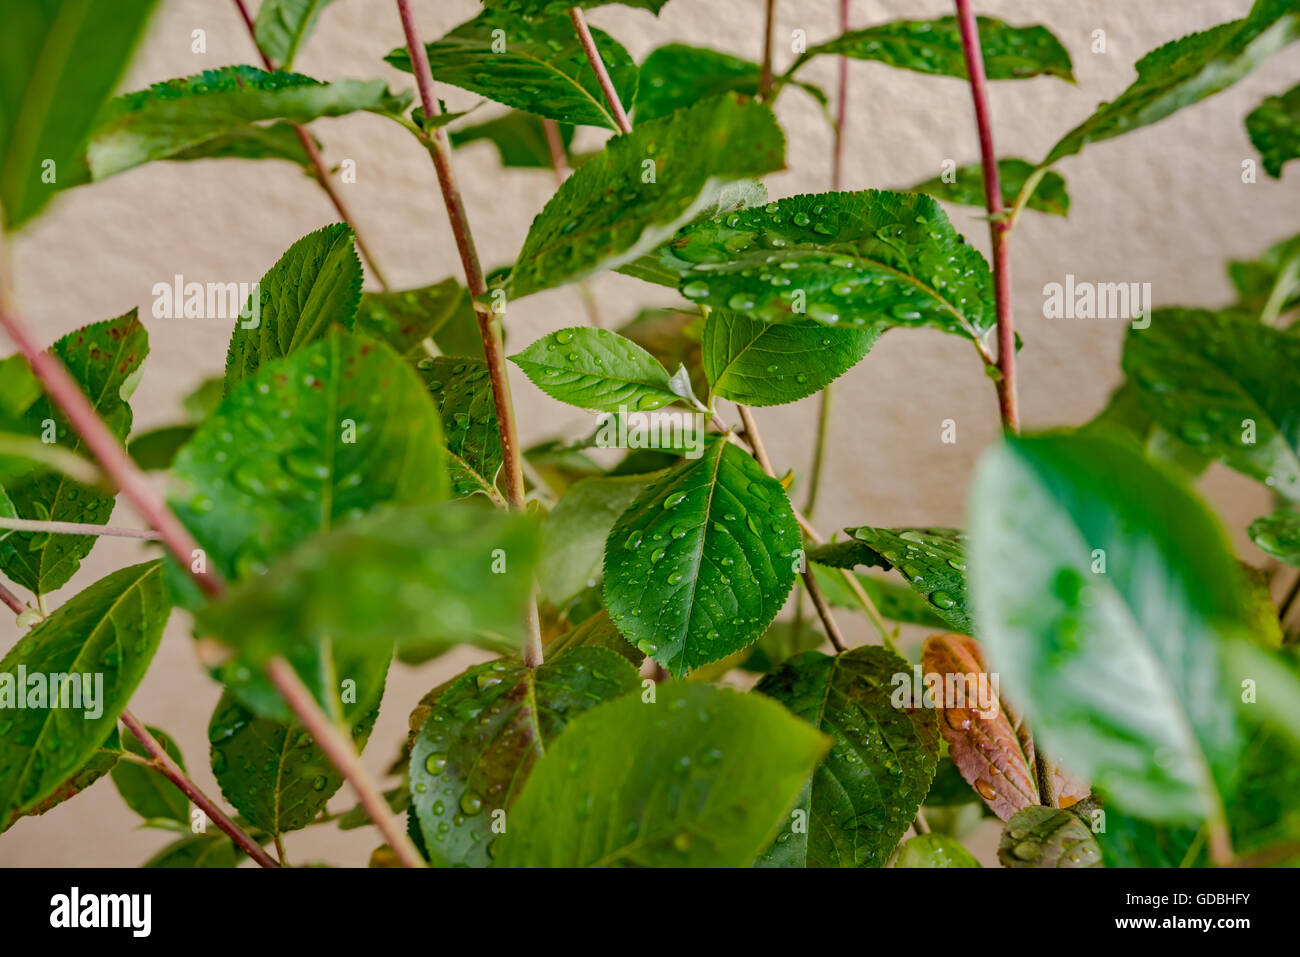 Chokeberry plant with leaves Stock Photo